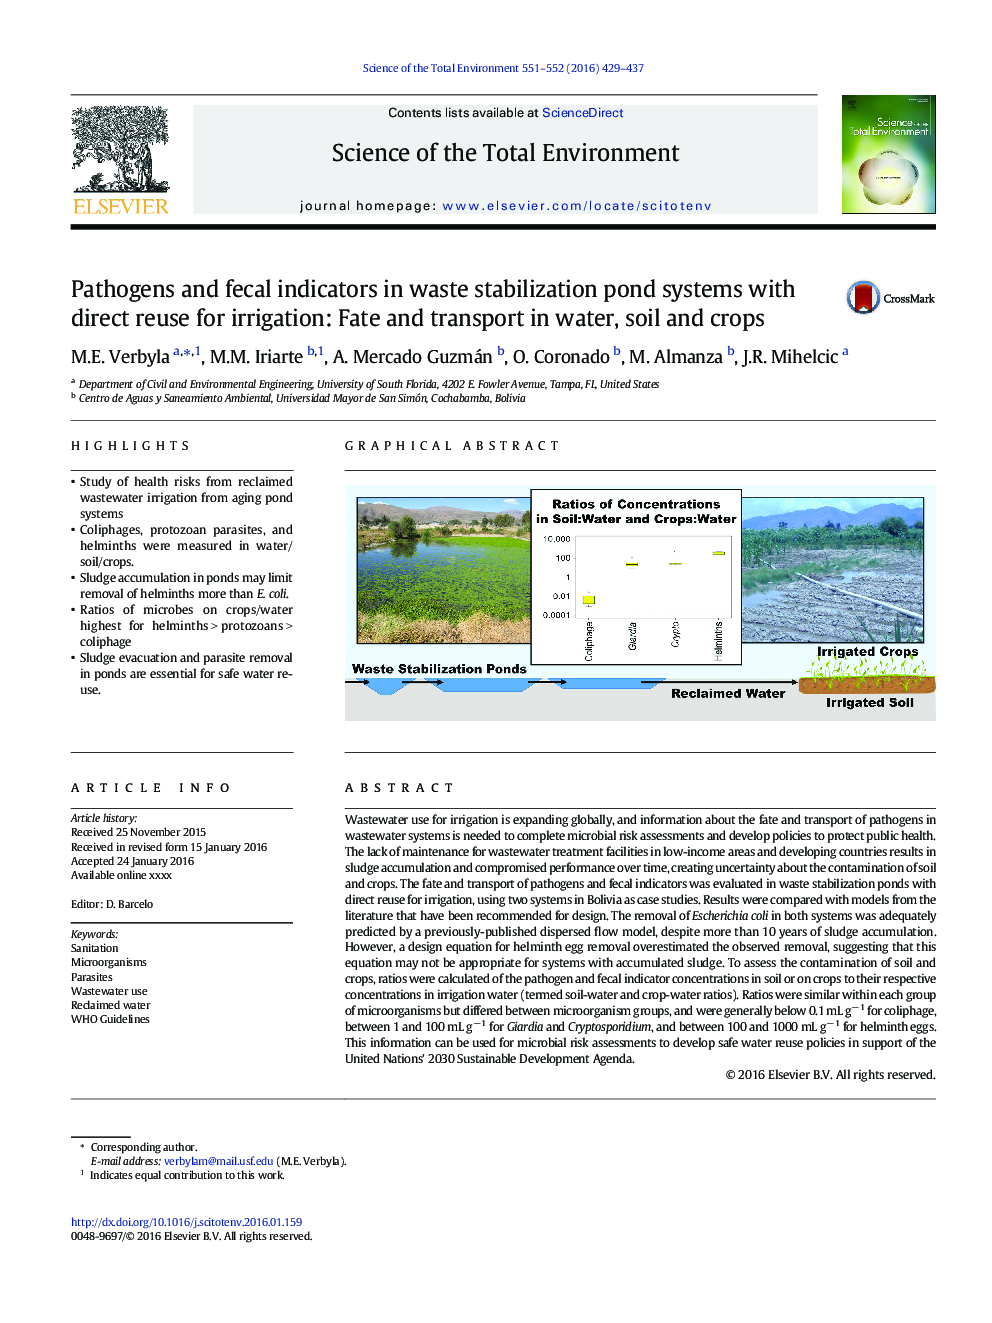 Pathogens and fecal indicators in waste stabilization pond systems with direct reuse for irrigation: Fate and transport in water, soil and crops